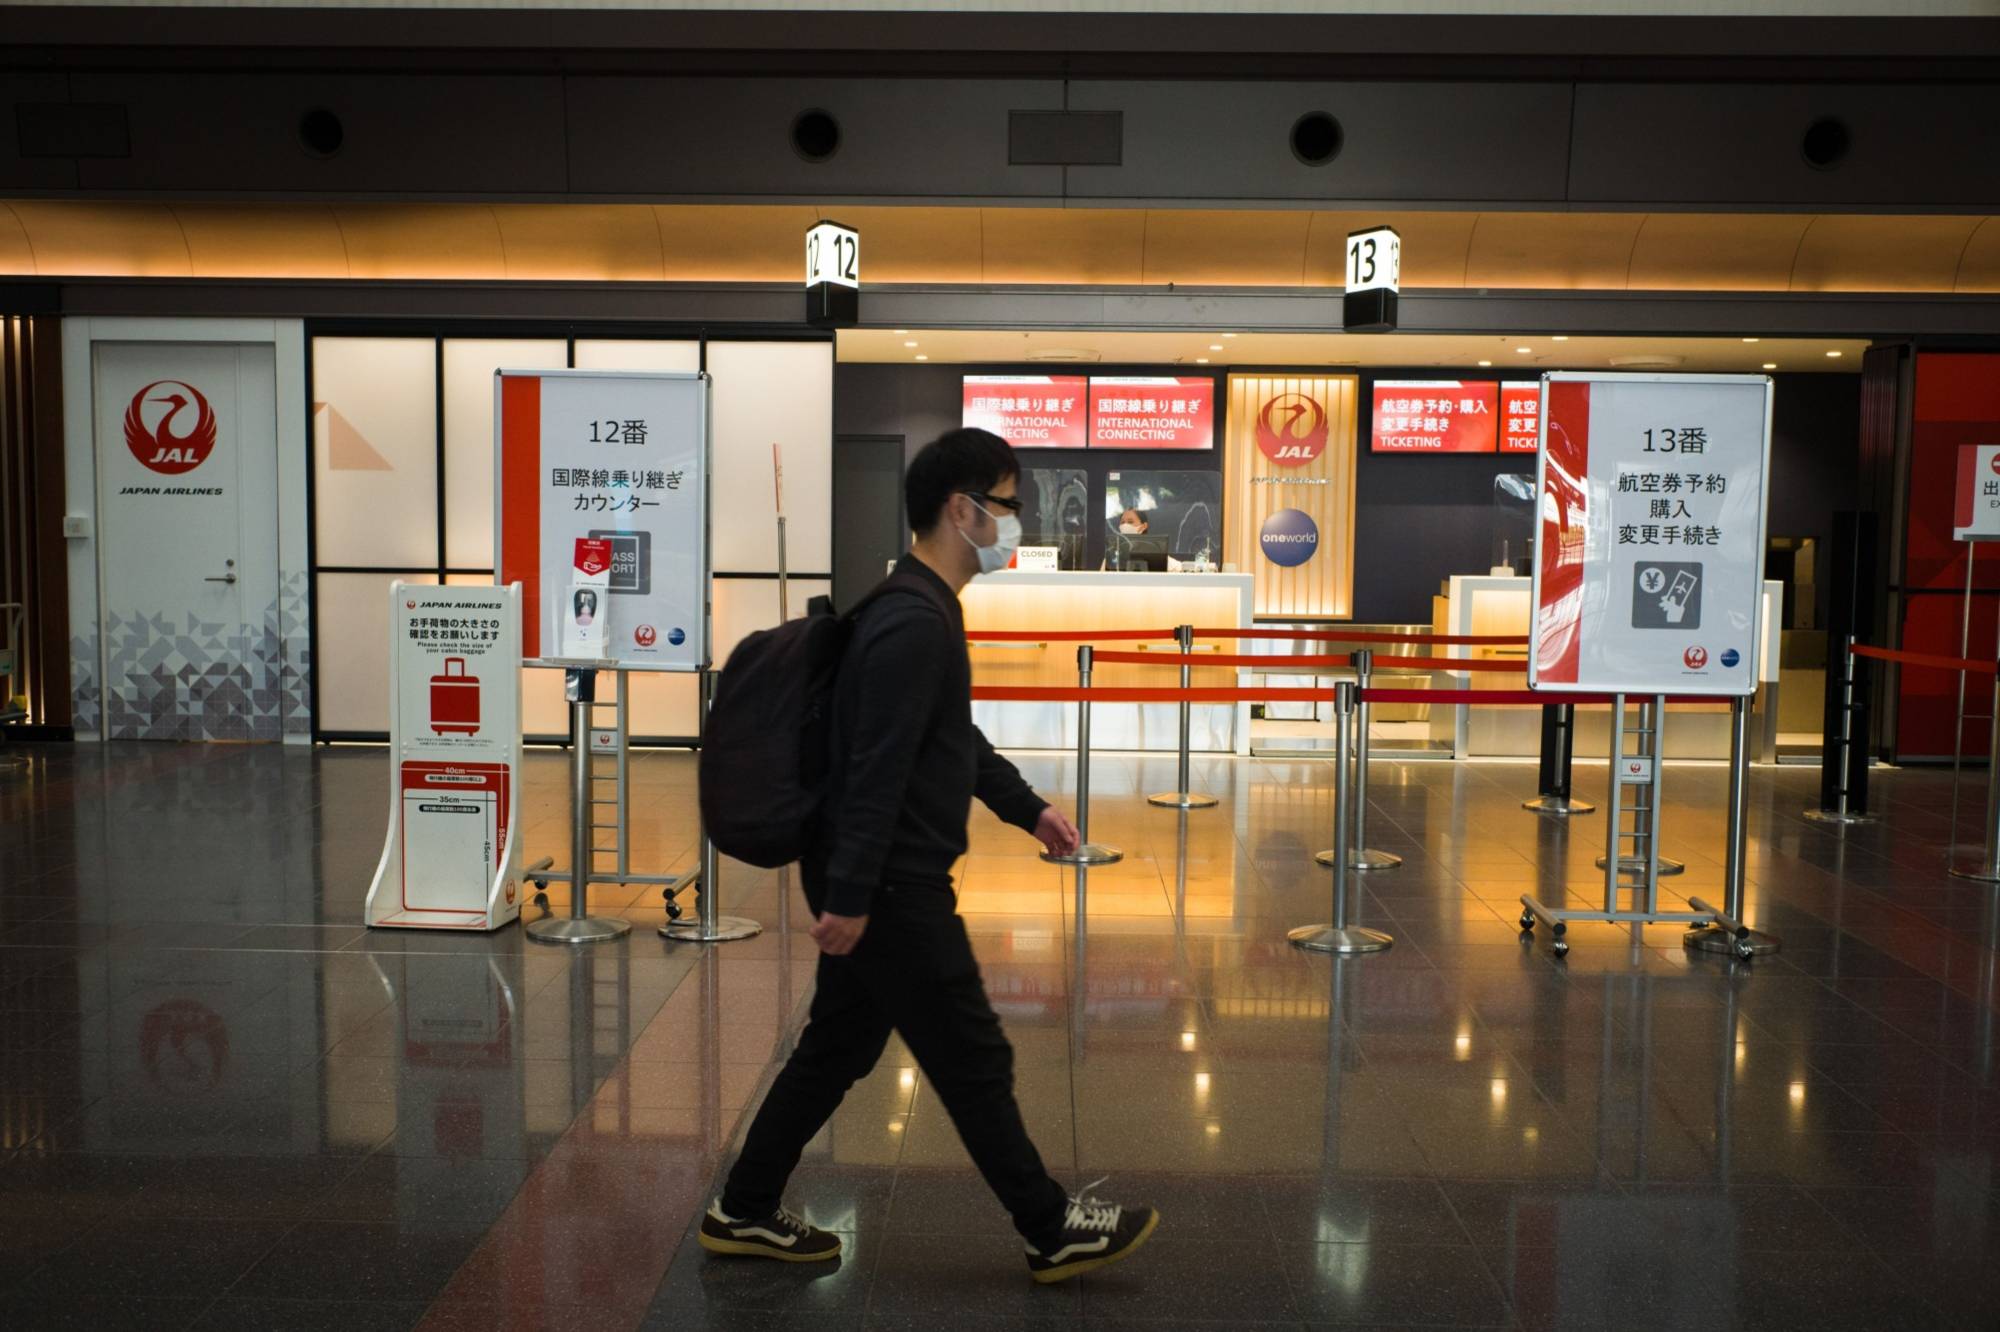 Haneda Airport in October 2020. The planned change to Japan's quarantine policy will apply to those who present proof they have been fully vaccinated against COVID-19 and are able to observe the shorter quarantine period at home or at an accommodation of their choosing. | BLOOMBERG